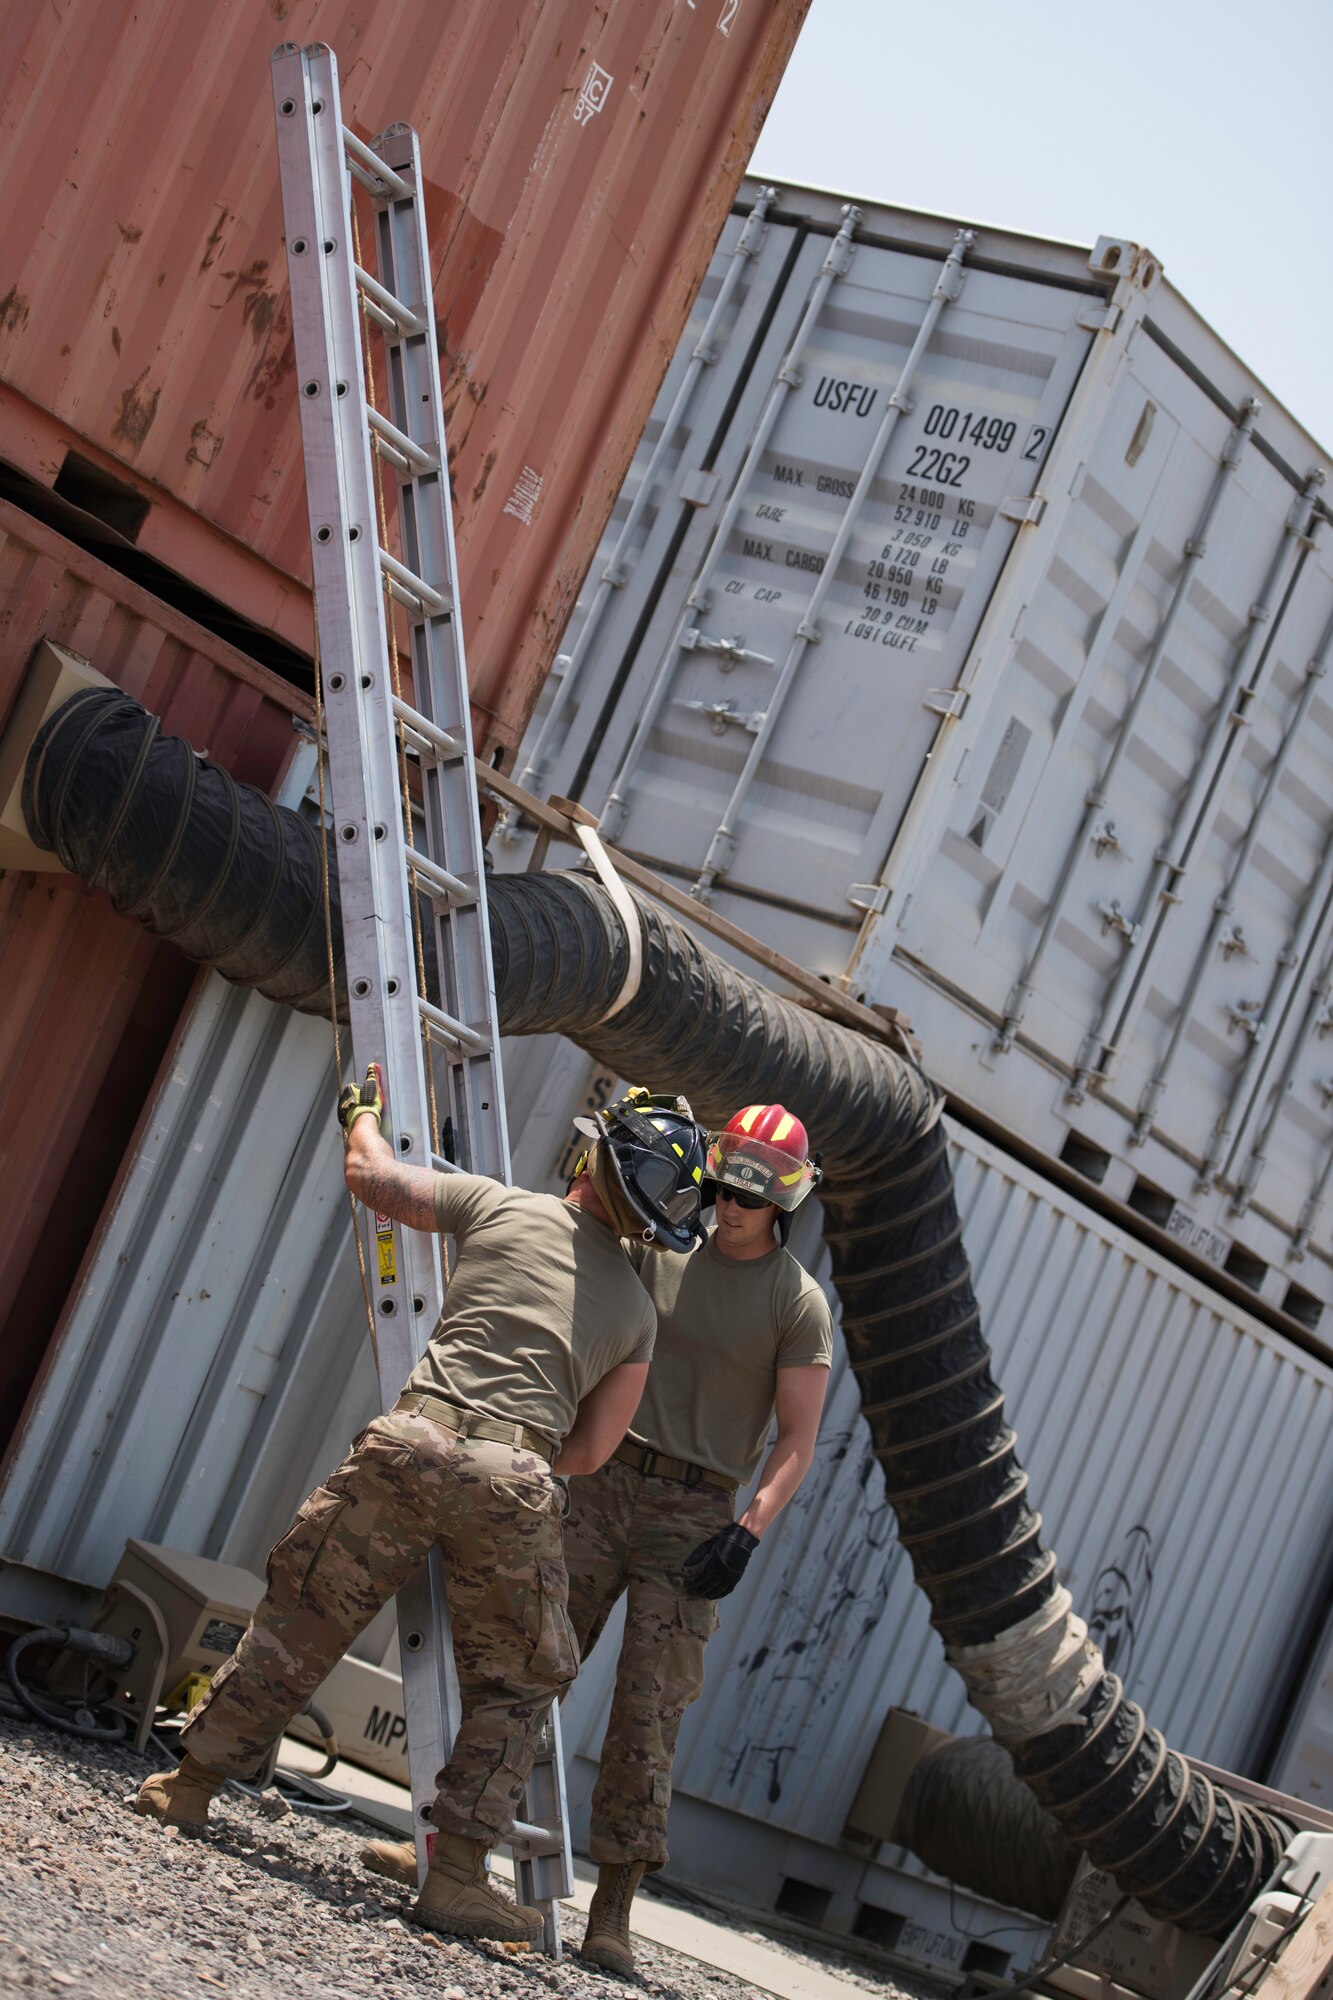 U.S. Air Force Senior Airman Logan Reed and Staff Sgt. Branden Sherwood, 870th Air Expeditionary Squadron firefighters, set up a ladder at Chabelley Airfield, Djibouti, June 11, 2019. Throwing ladders is a common practice for firefighters maintaining readiness. (U.S. Air Force photo by Staff Sgt. Devin Boyer)